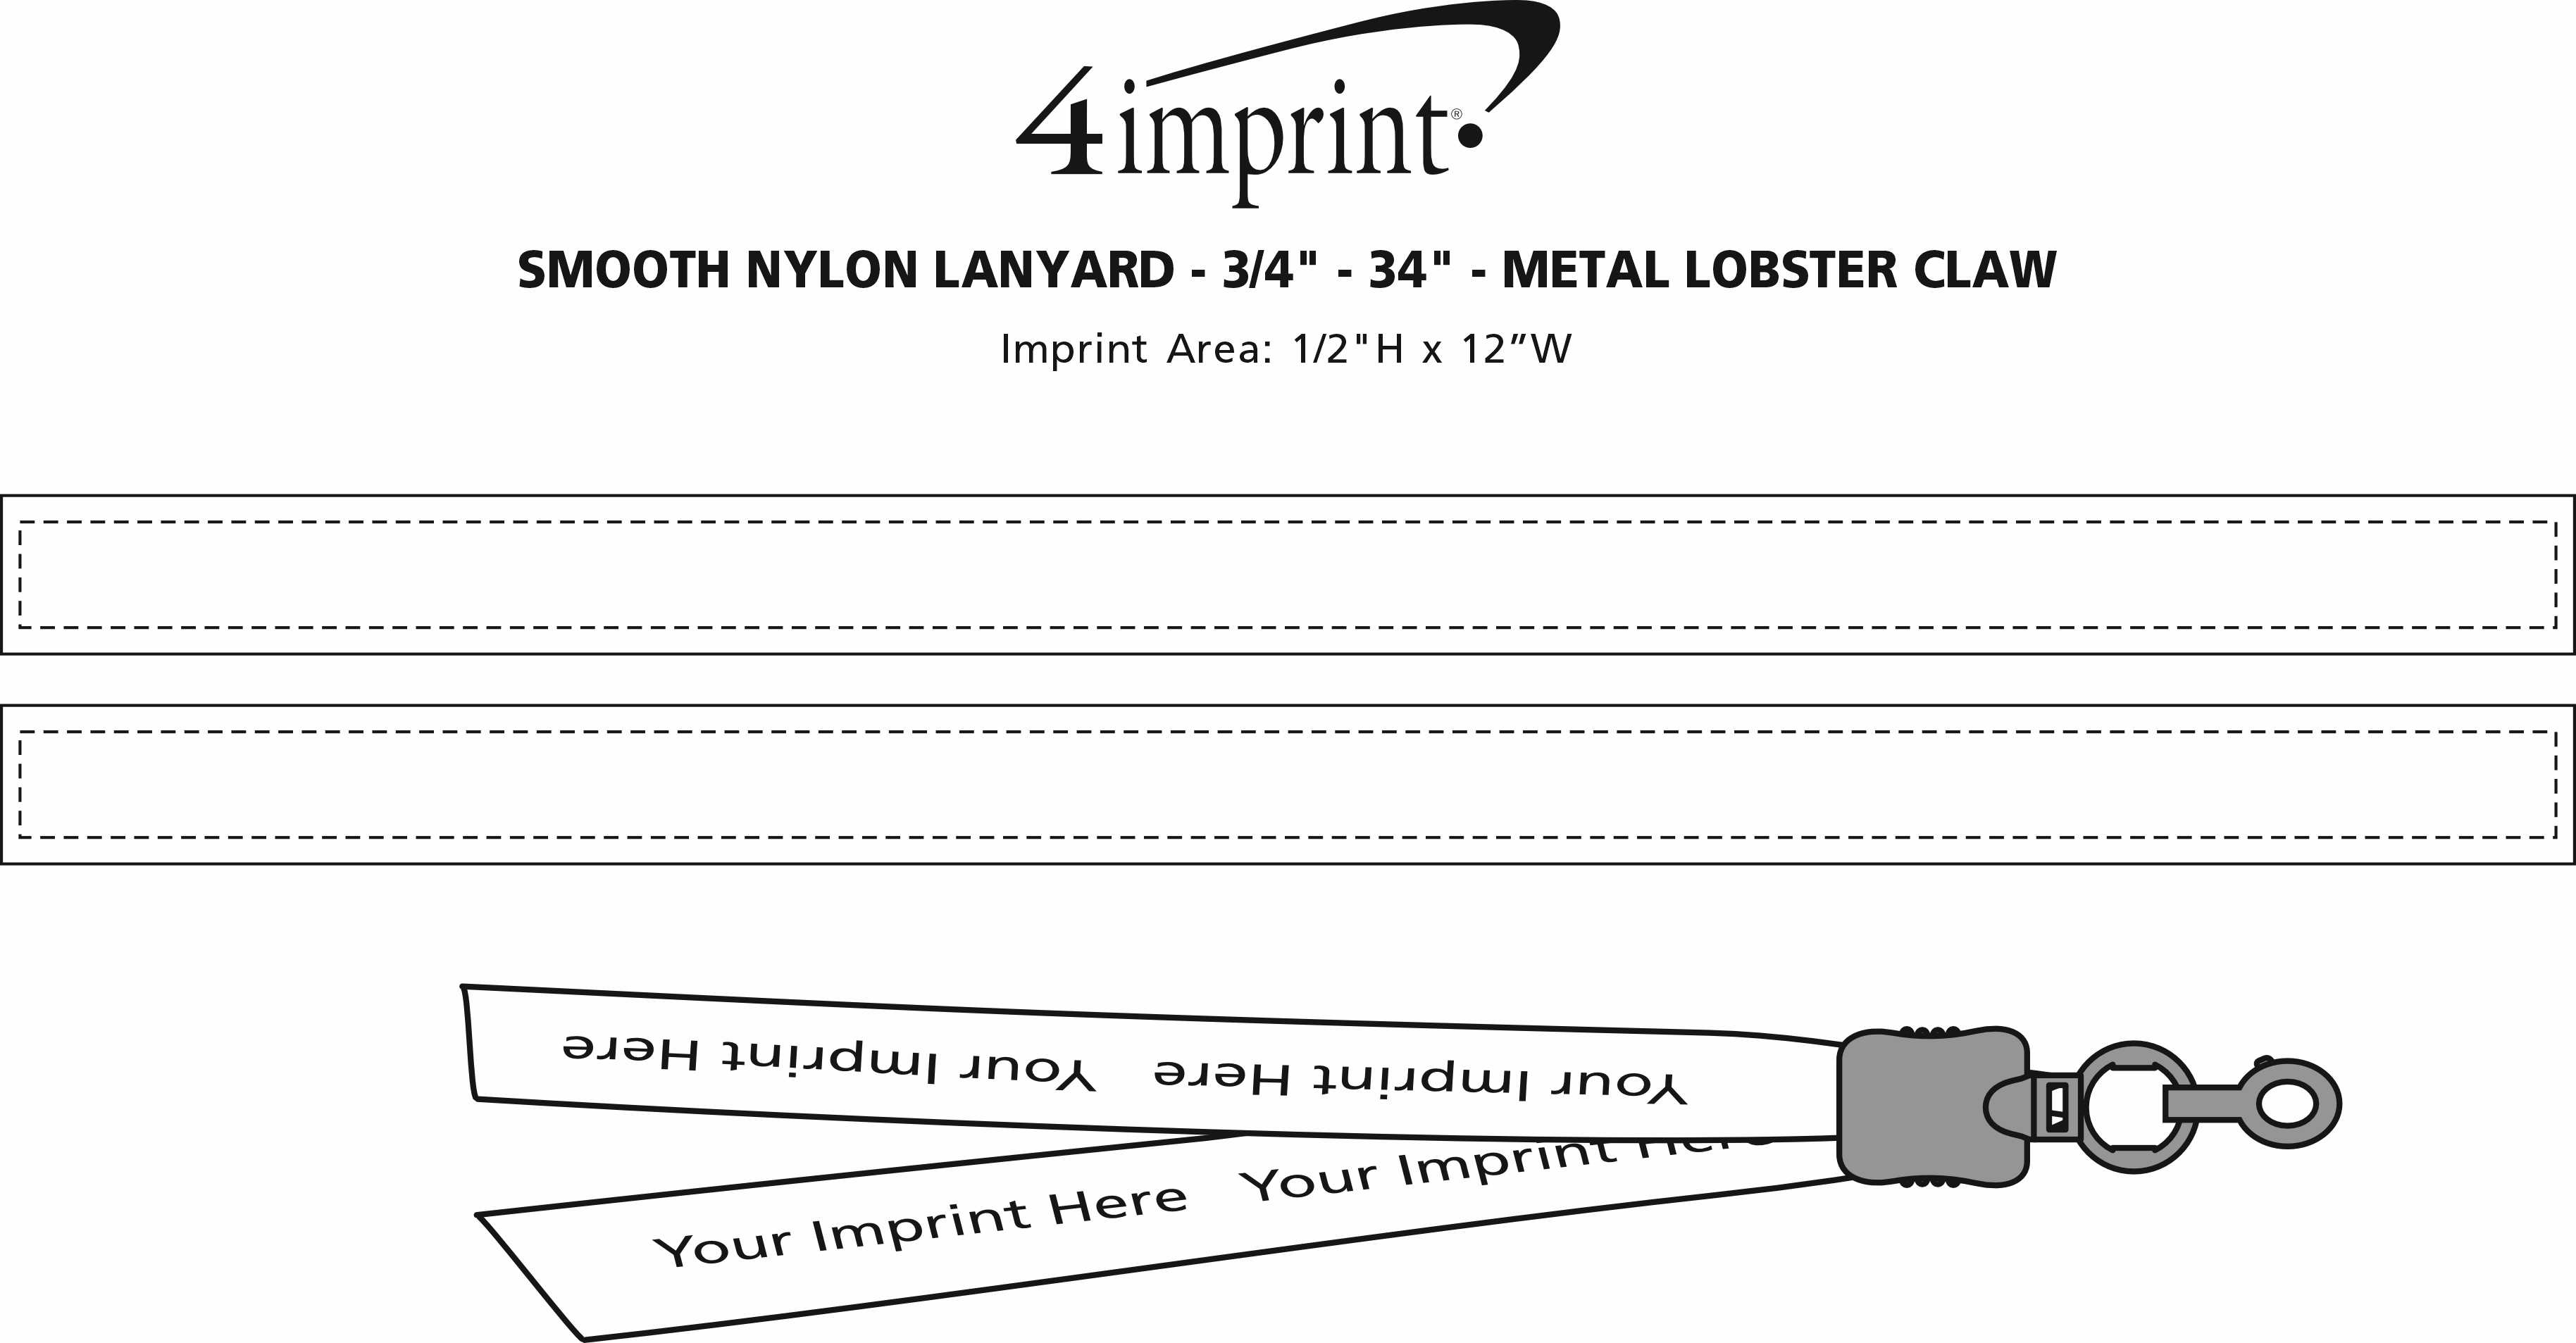 Imprint Area of Smooth Nylon Lanyard - 3/4" - 34" - Metal Lobster Claw